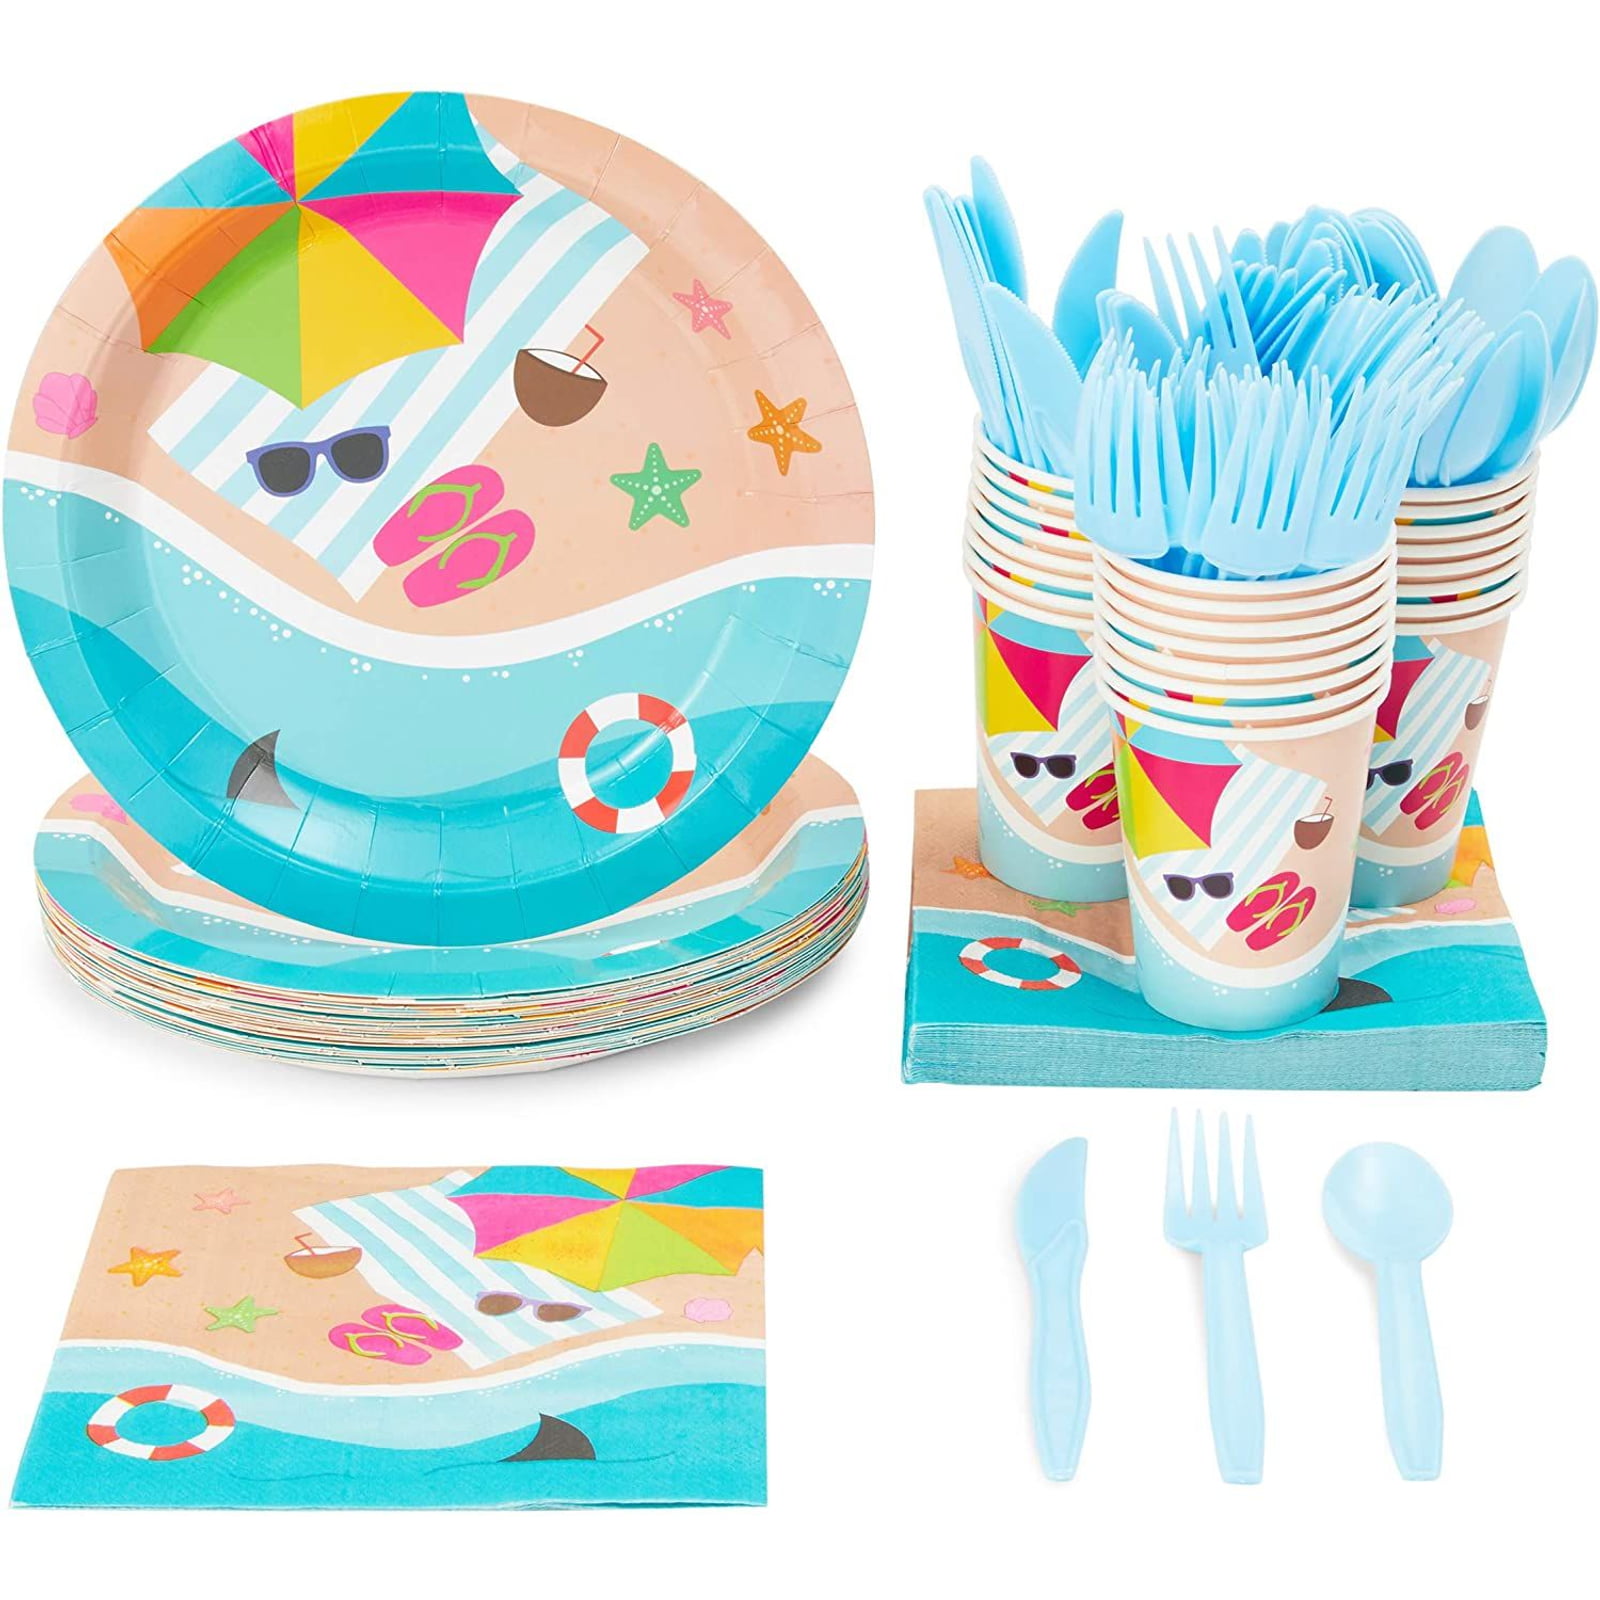 Including 24 Dessert Plate Serves 24 24 Cup 48 Piece Sea Life Marine Animals Theme Disposable Paper Plate Tableware Dinnerware Set Cup Set Kids Birthday Baby Shower Party Plates Set 